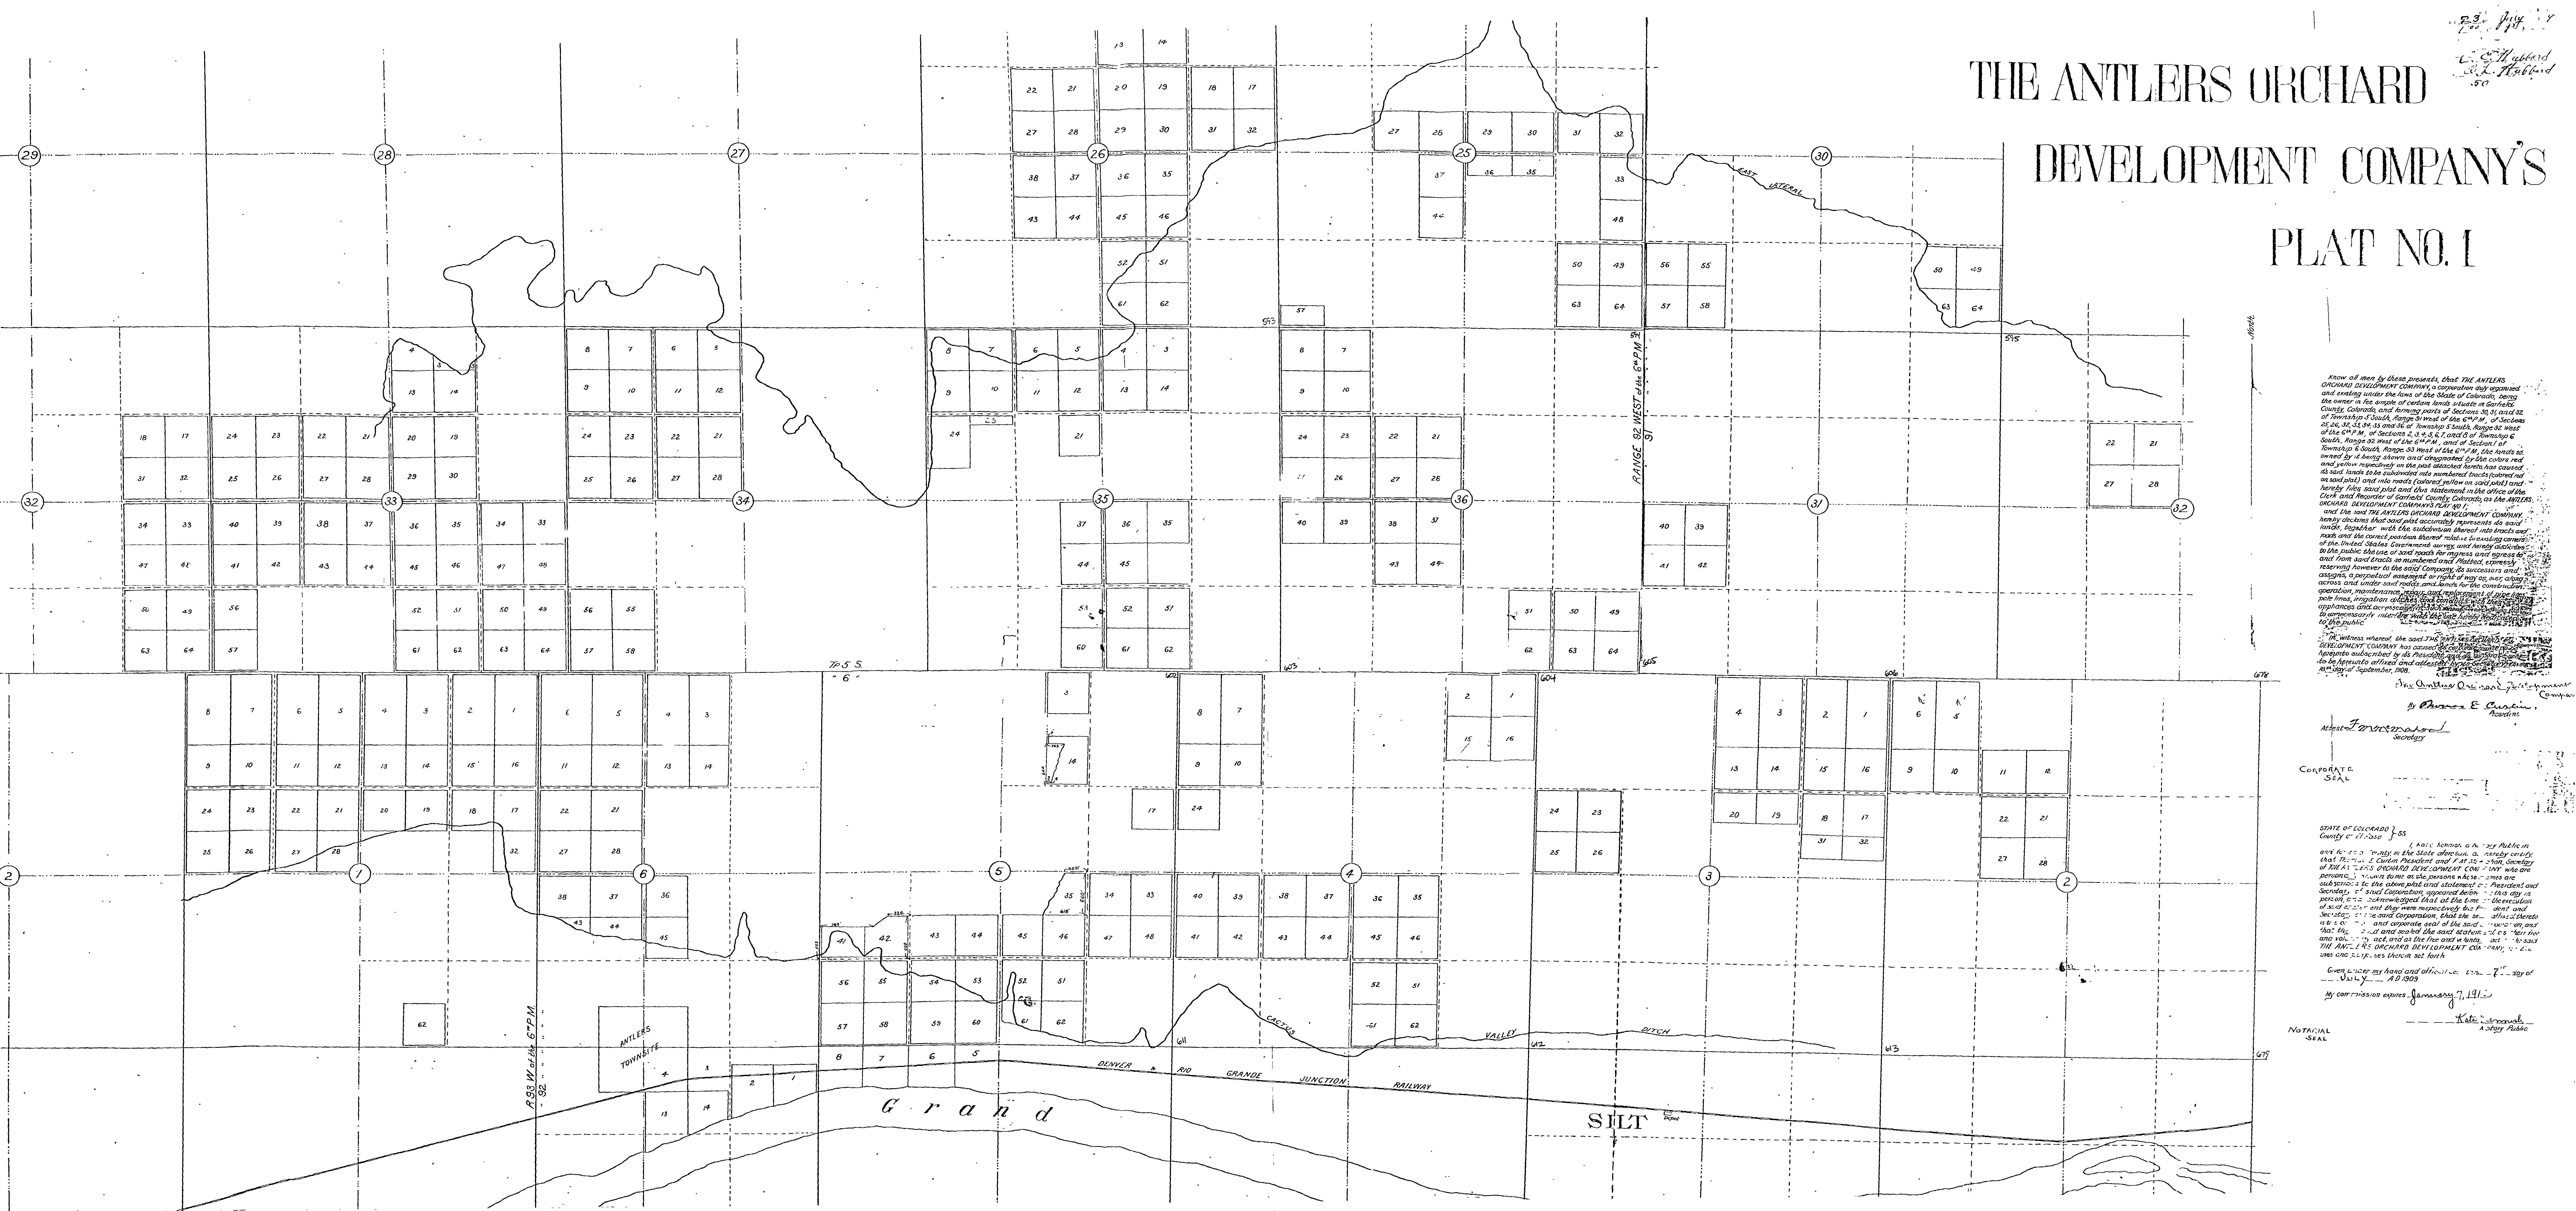 Antlers Orchard Development Co. Plat Map (1908). Source: Garfield Co. Colorado Geographic Information System.